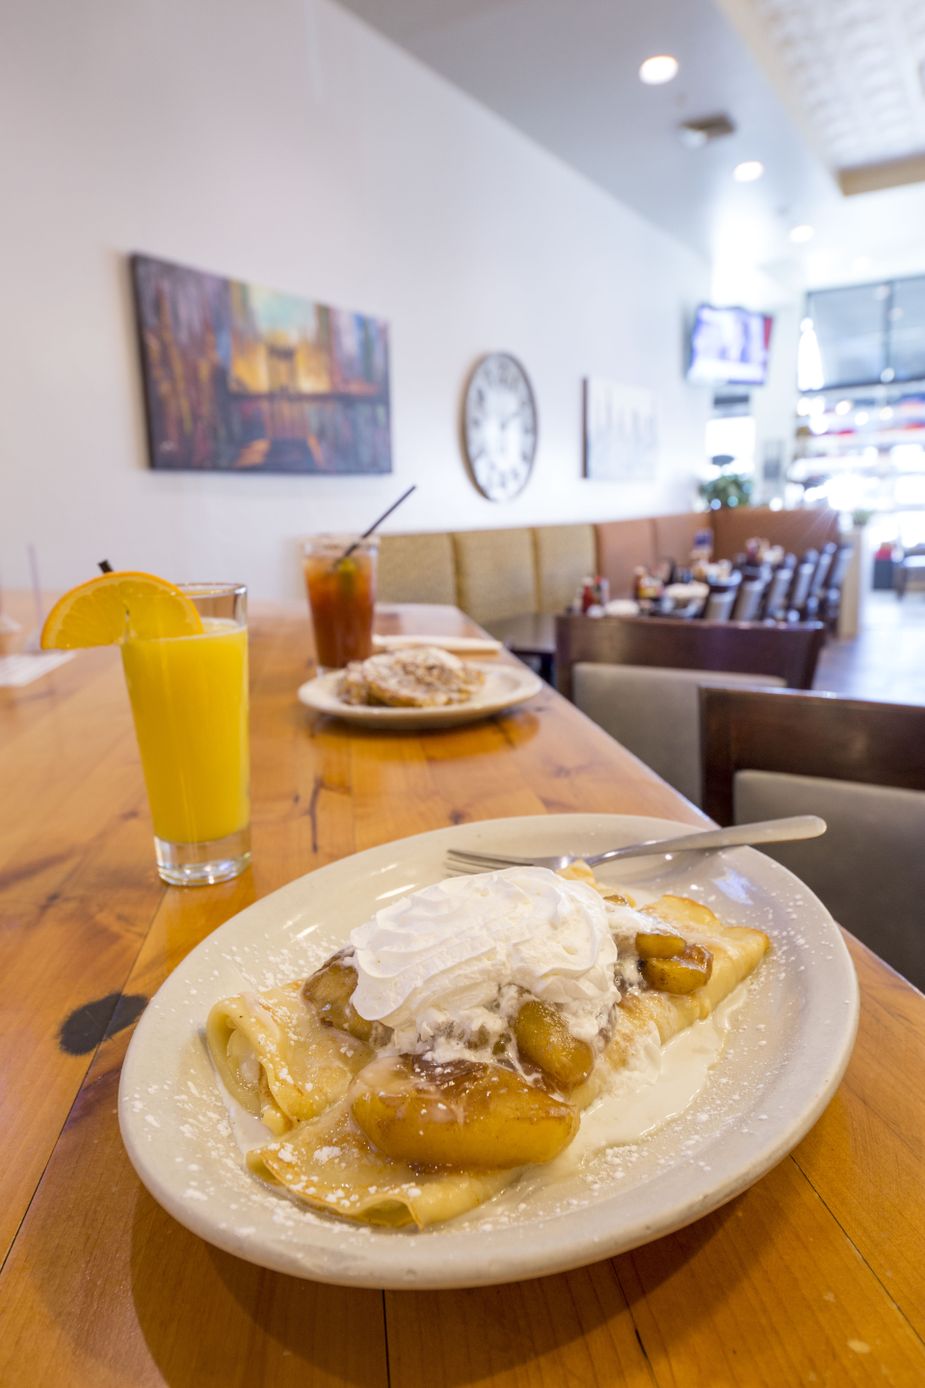 Fire-roasted apple crêpes at Granny's in Stillwater. Photo by Lori Duckworth